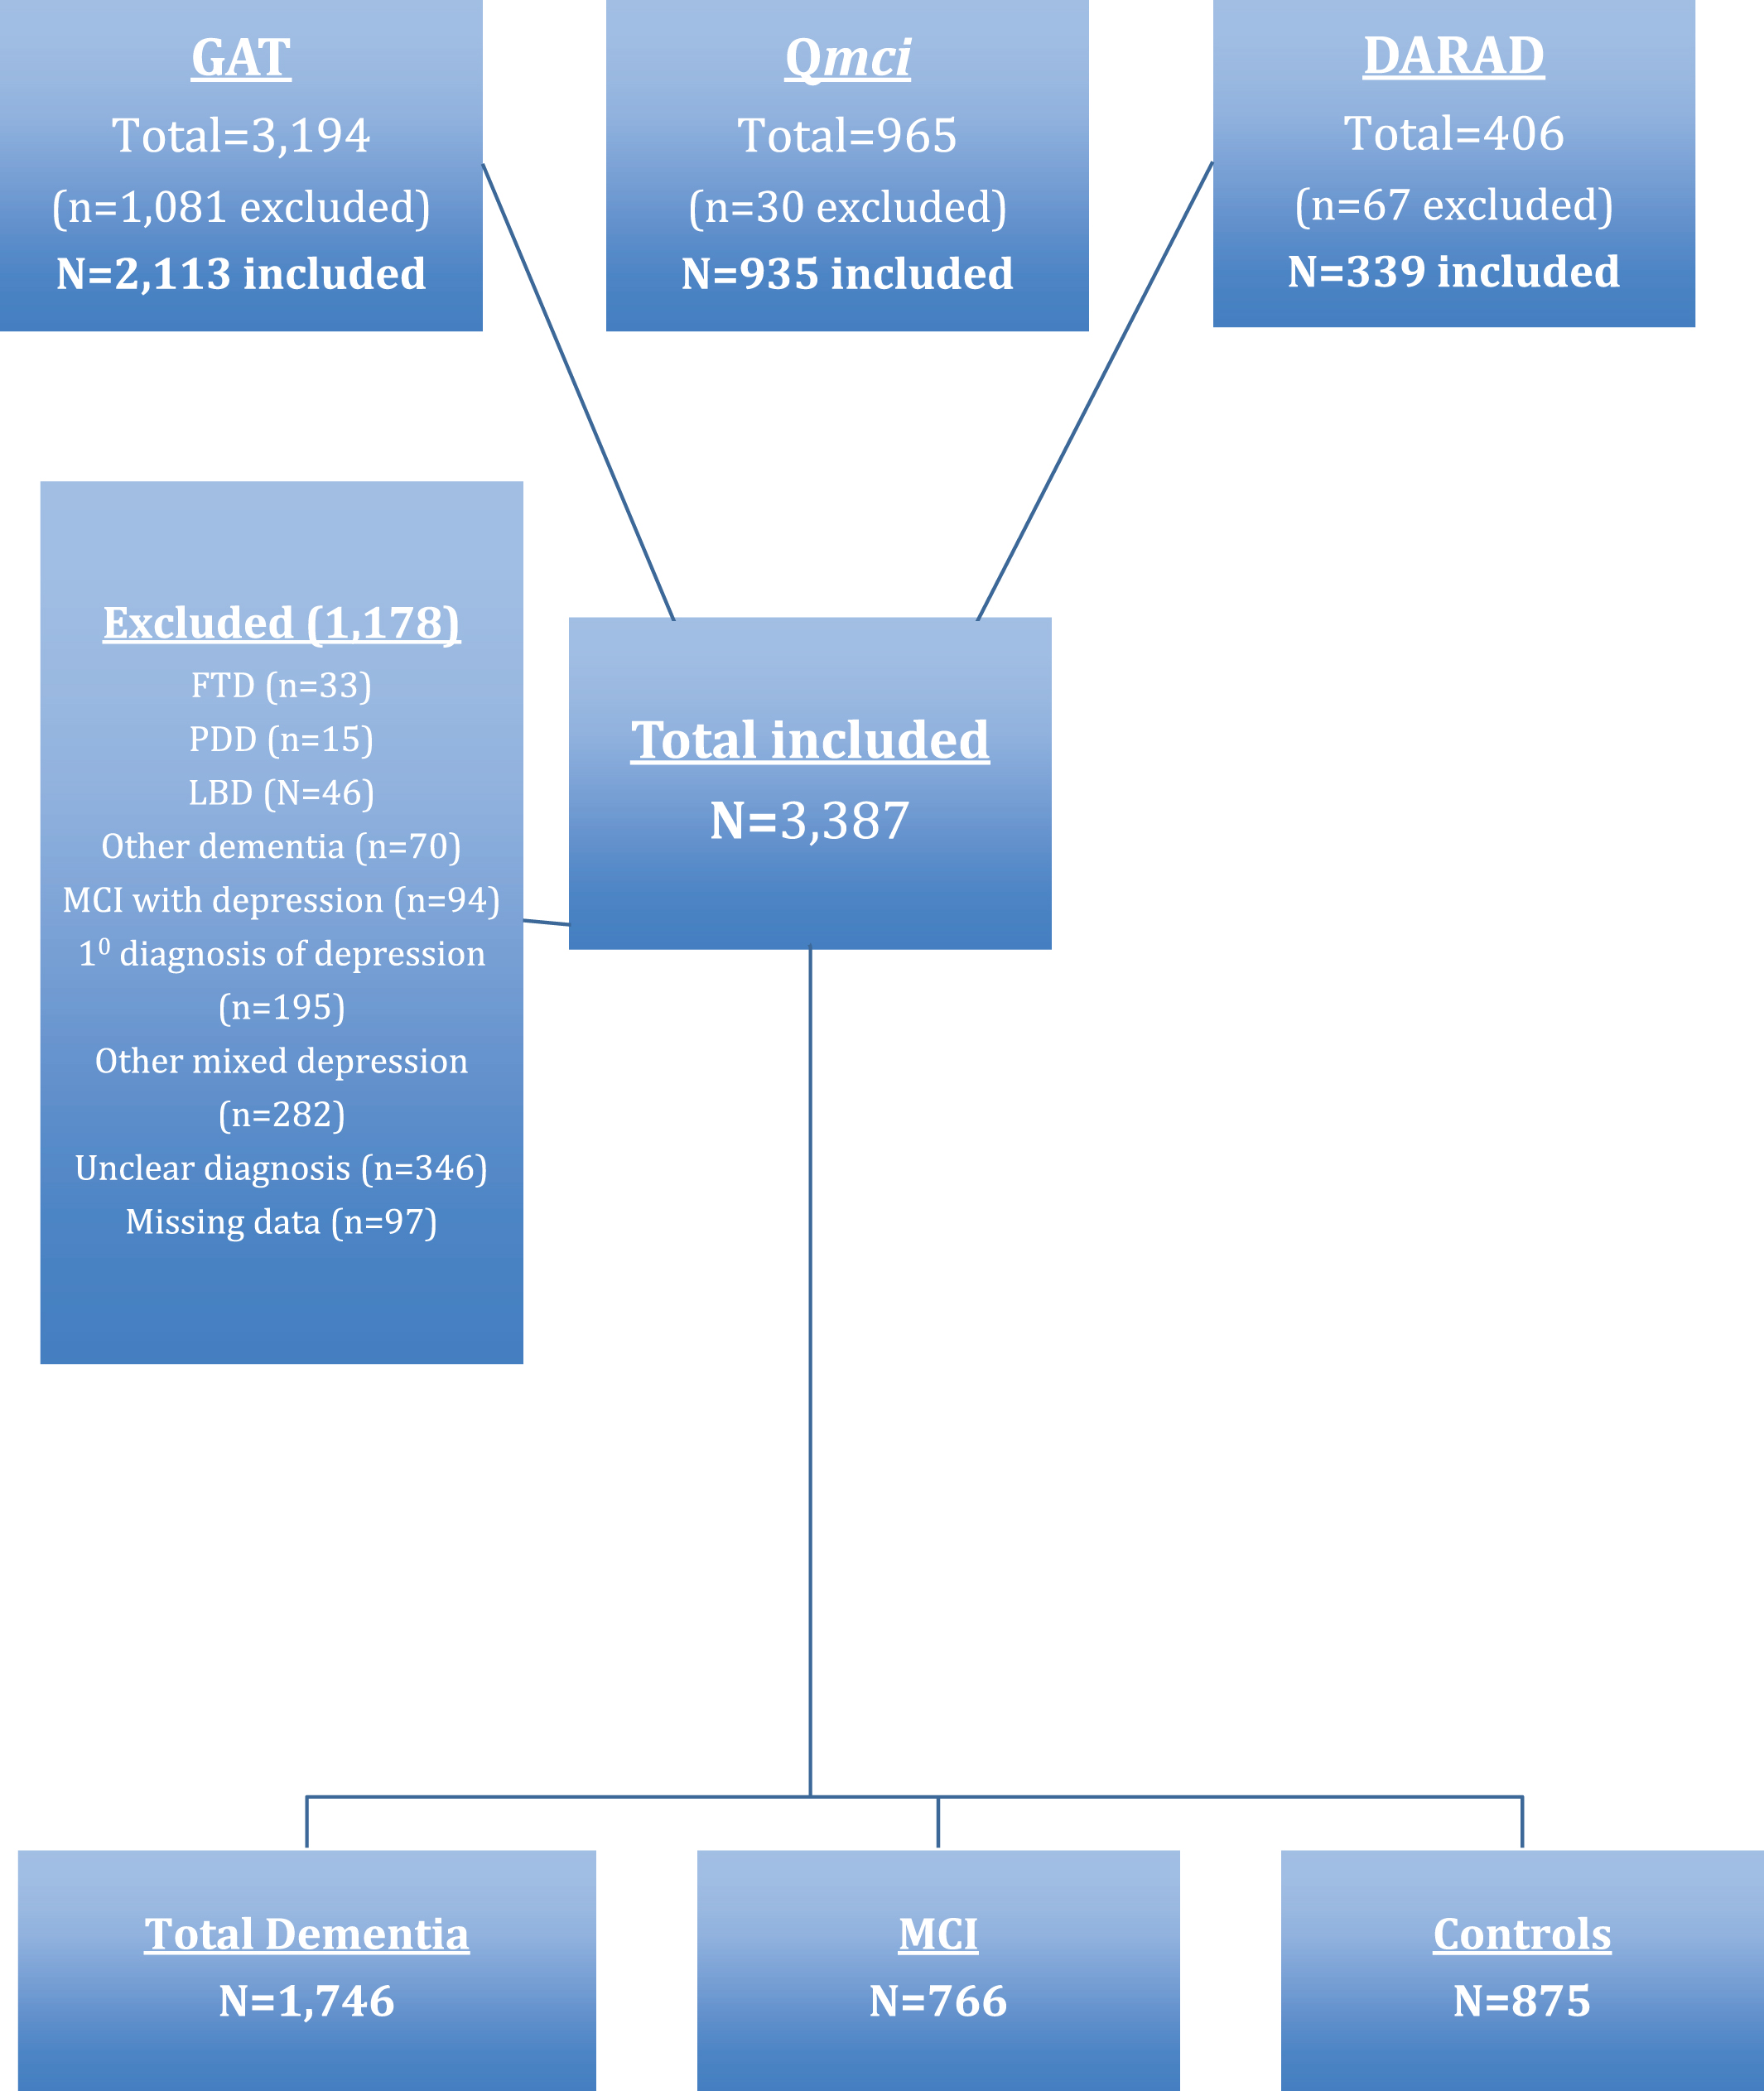 Flow chart presenting the selection of participants from three data sets: The Geriatric Assessment Tool (GAT), Quick Mild Cognitive Impairment (Qmci) screen, and Doxycycline and Rifampicin for Alzheimer’s Disease (DARAD) trial databases including the number of normal controls, patients with mild cognitive impairment (MCI) and dementia.